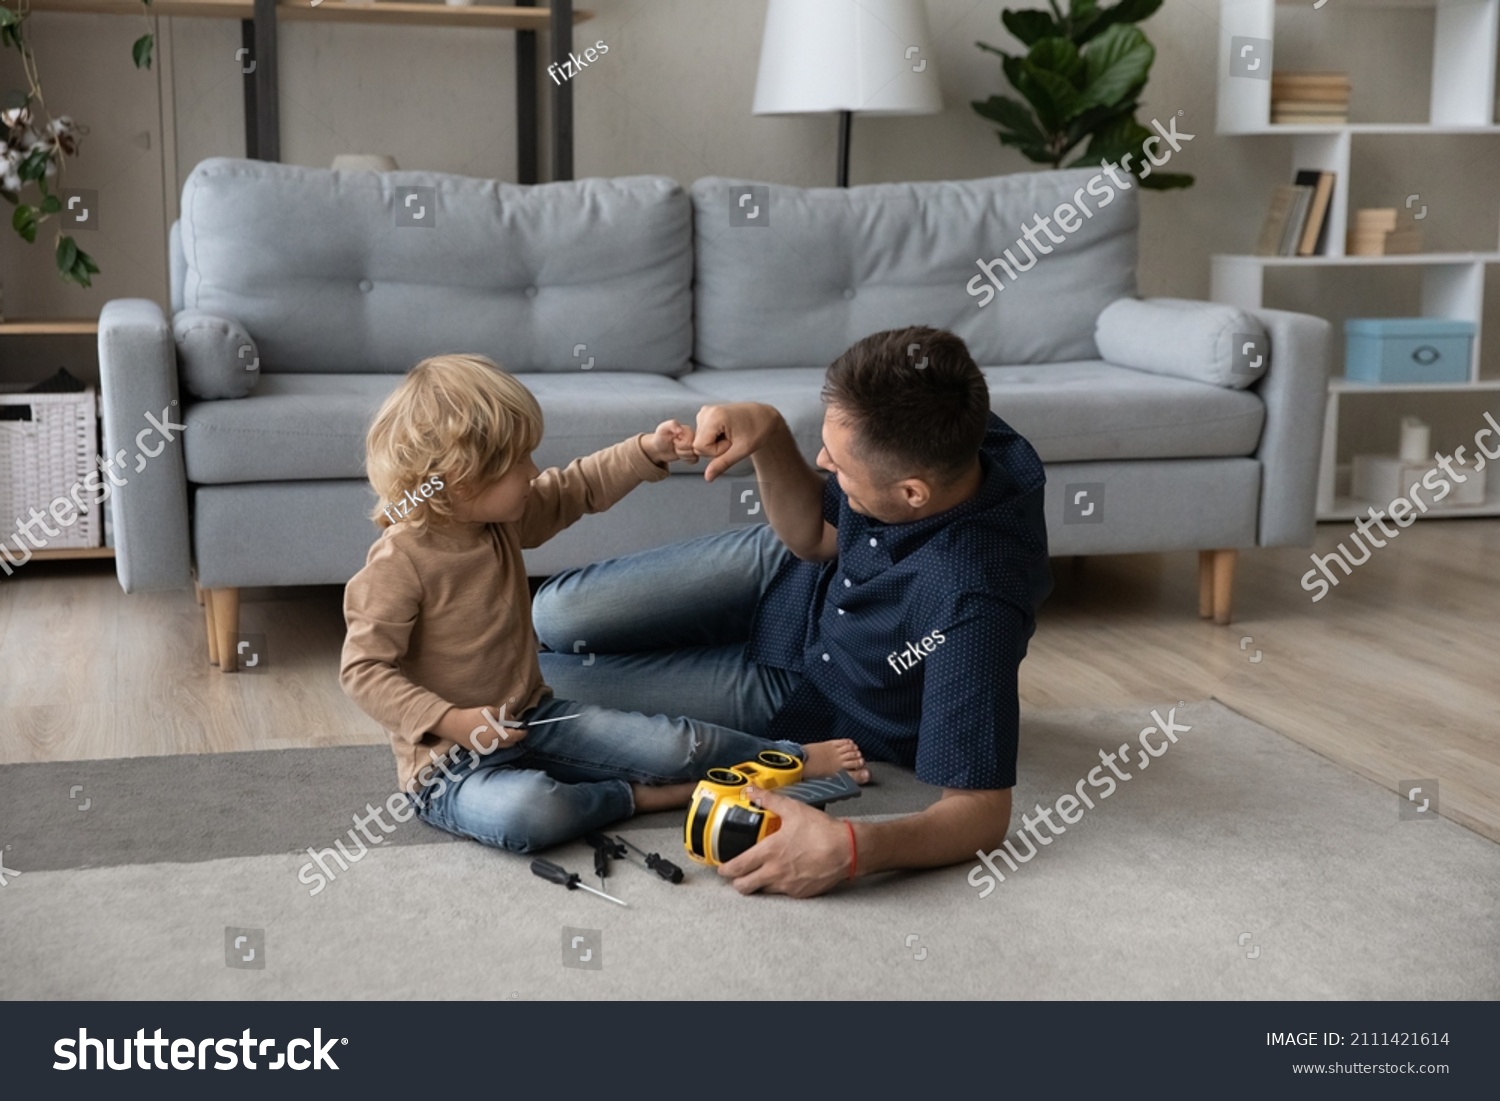 Happy cute small kid son bumping fists with caring millennial father, finishing repairing favorite toy car with screwdriver, having fun improving skills sitting on floor carpet together at home. #2111421614